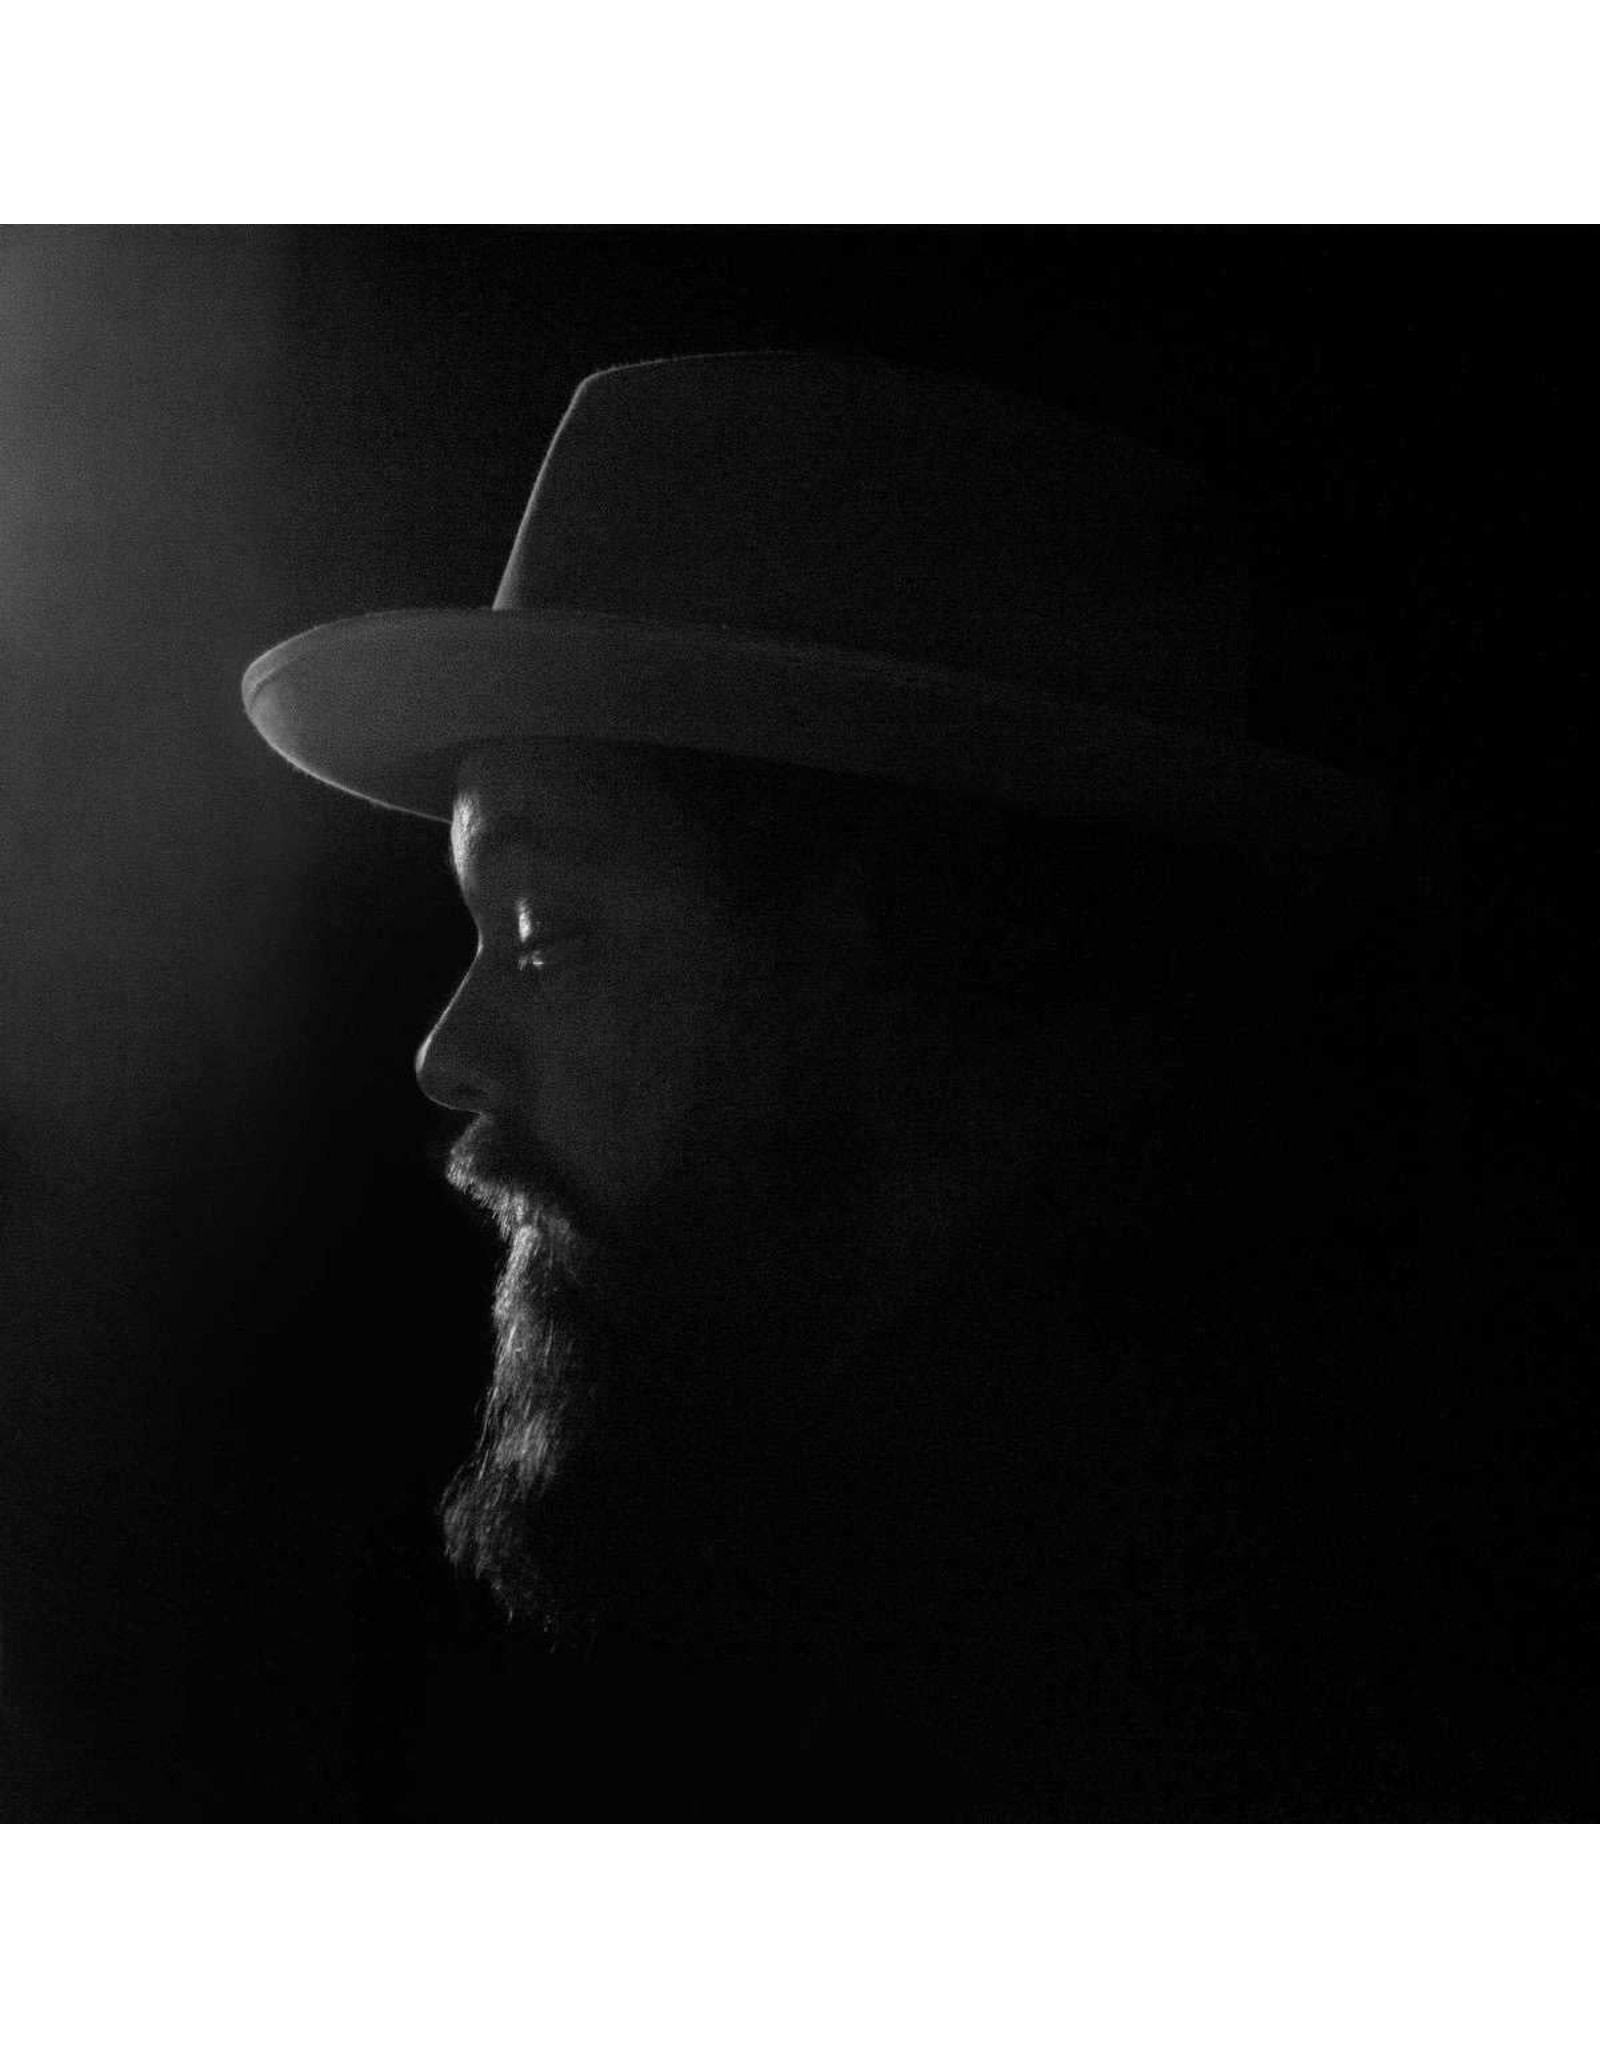 Nathaniel Rateliff & The Night Sweats - Tearing At The Seams (Deluxe Edition)